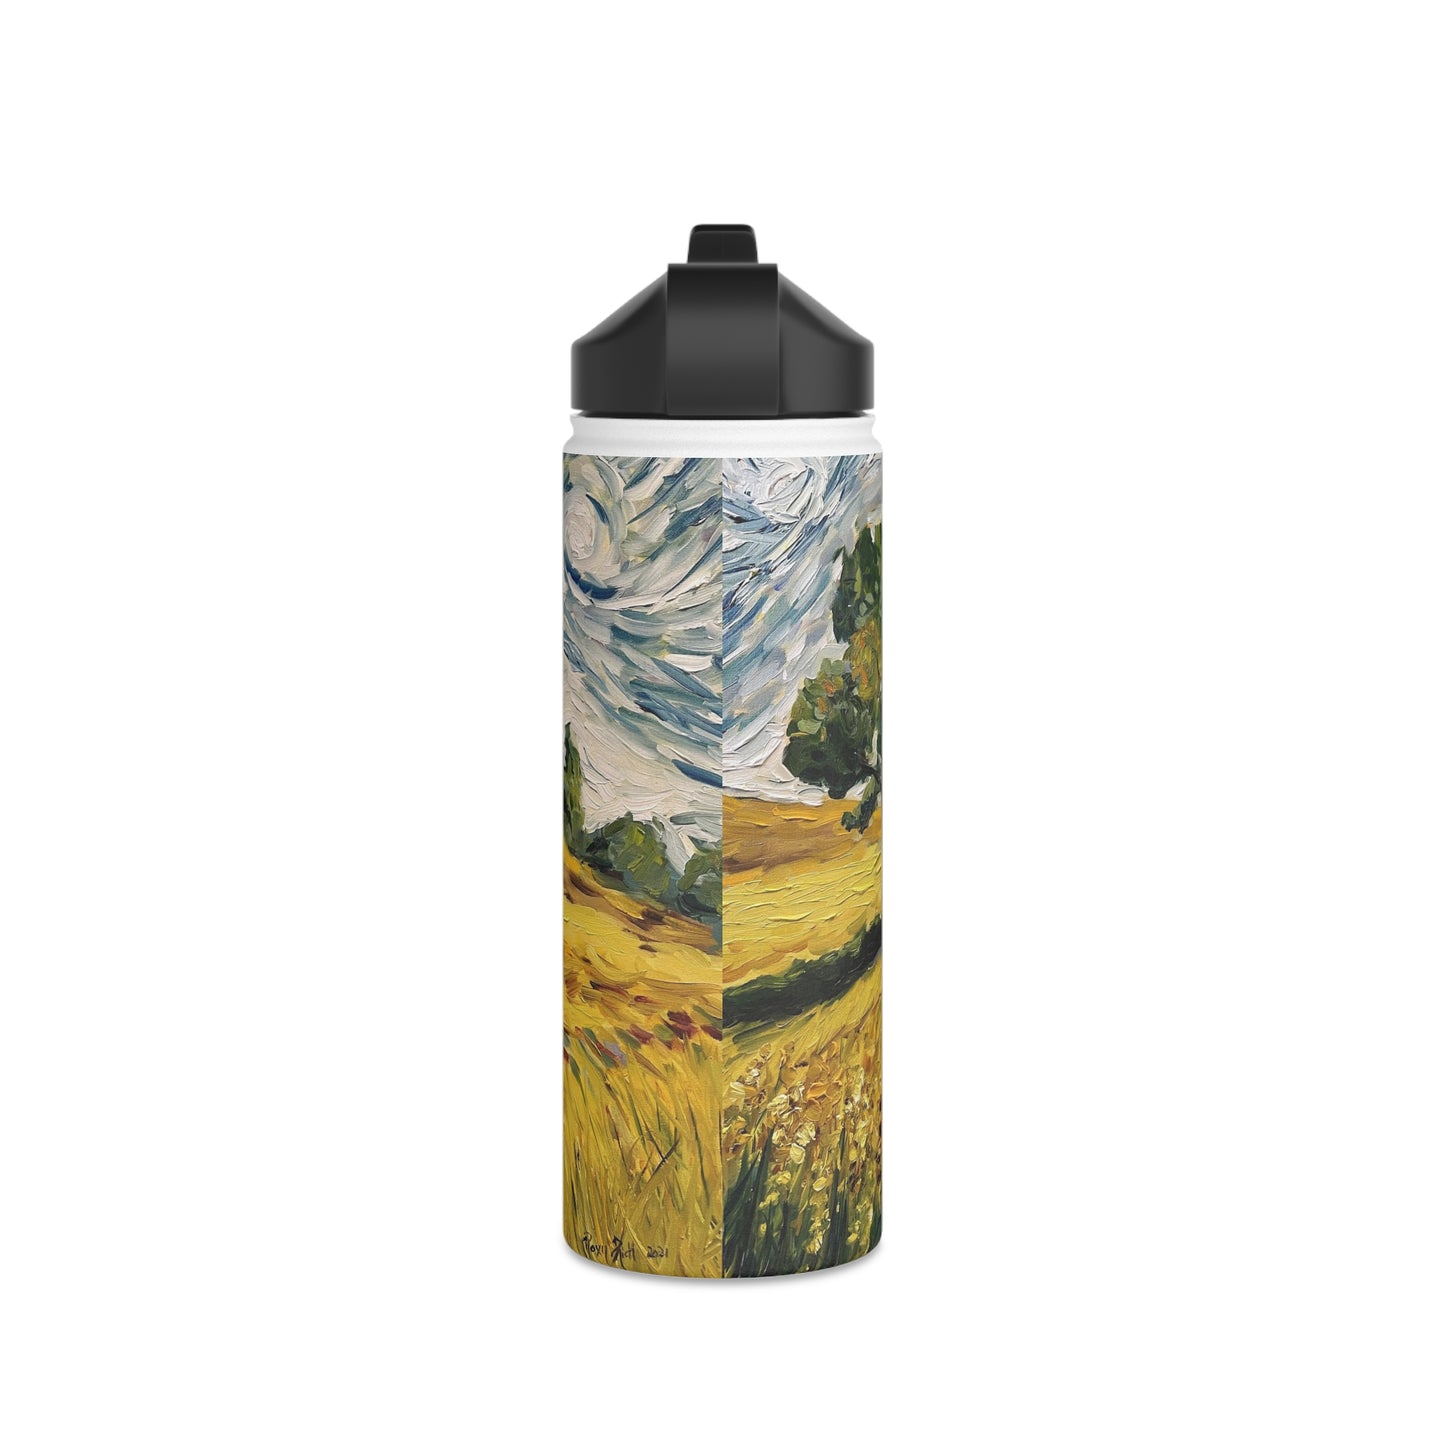 Sunny Day- Stainless Steel Water Bottle, Standard Lid